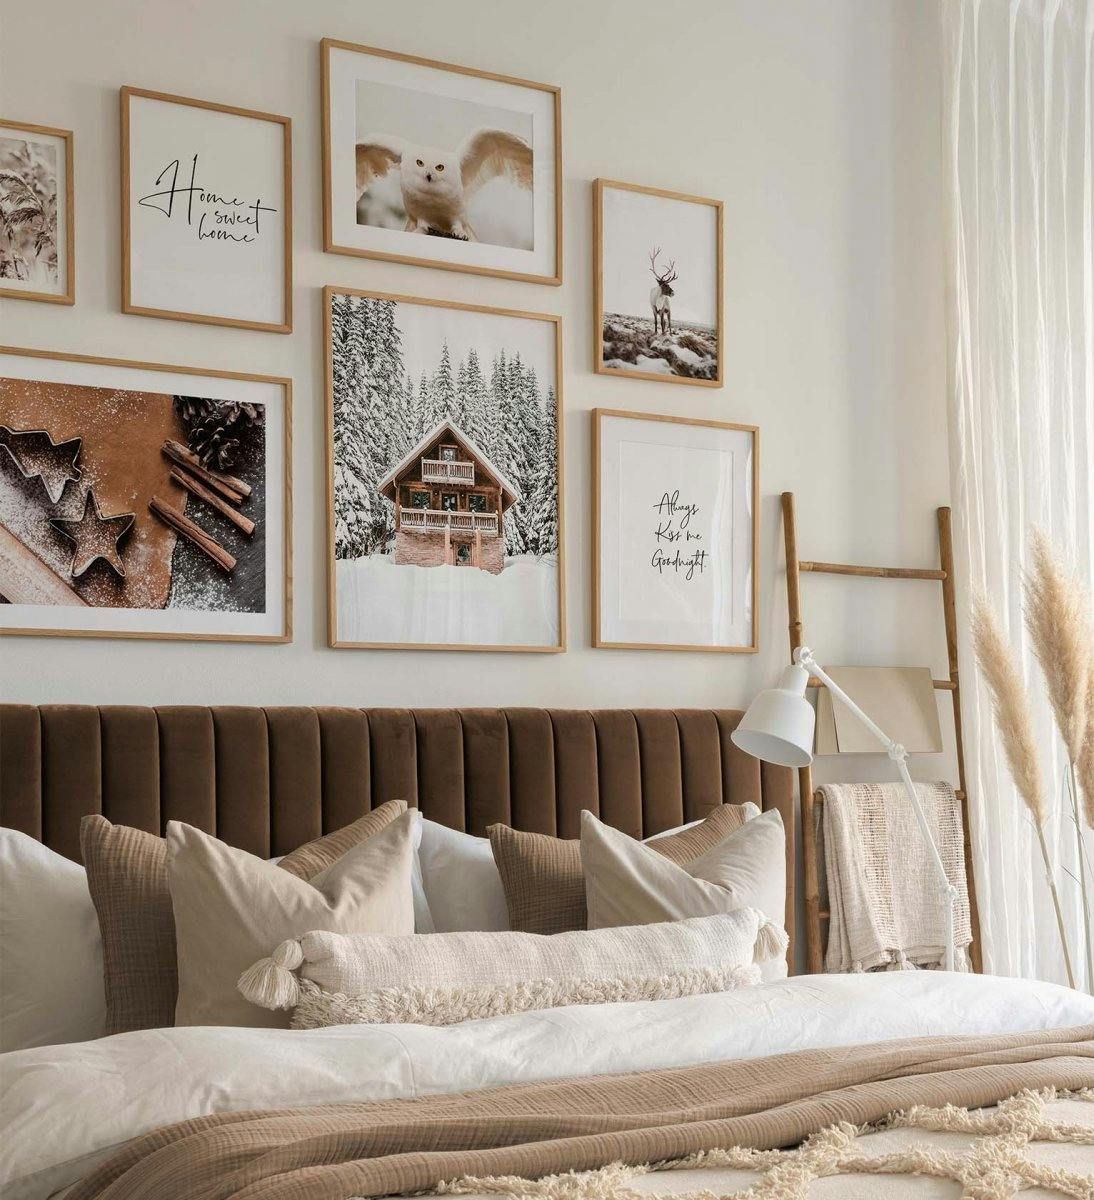 Gallery wall with winter prints in brown, white and black and white quotes with oak frames for bedroom